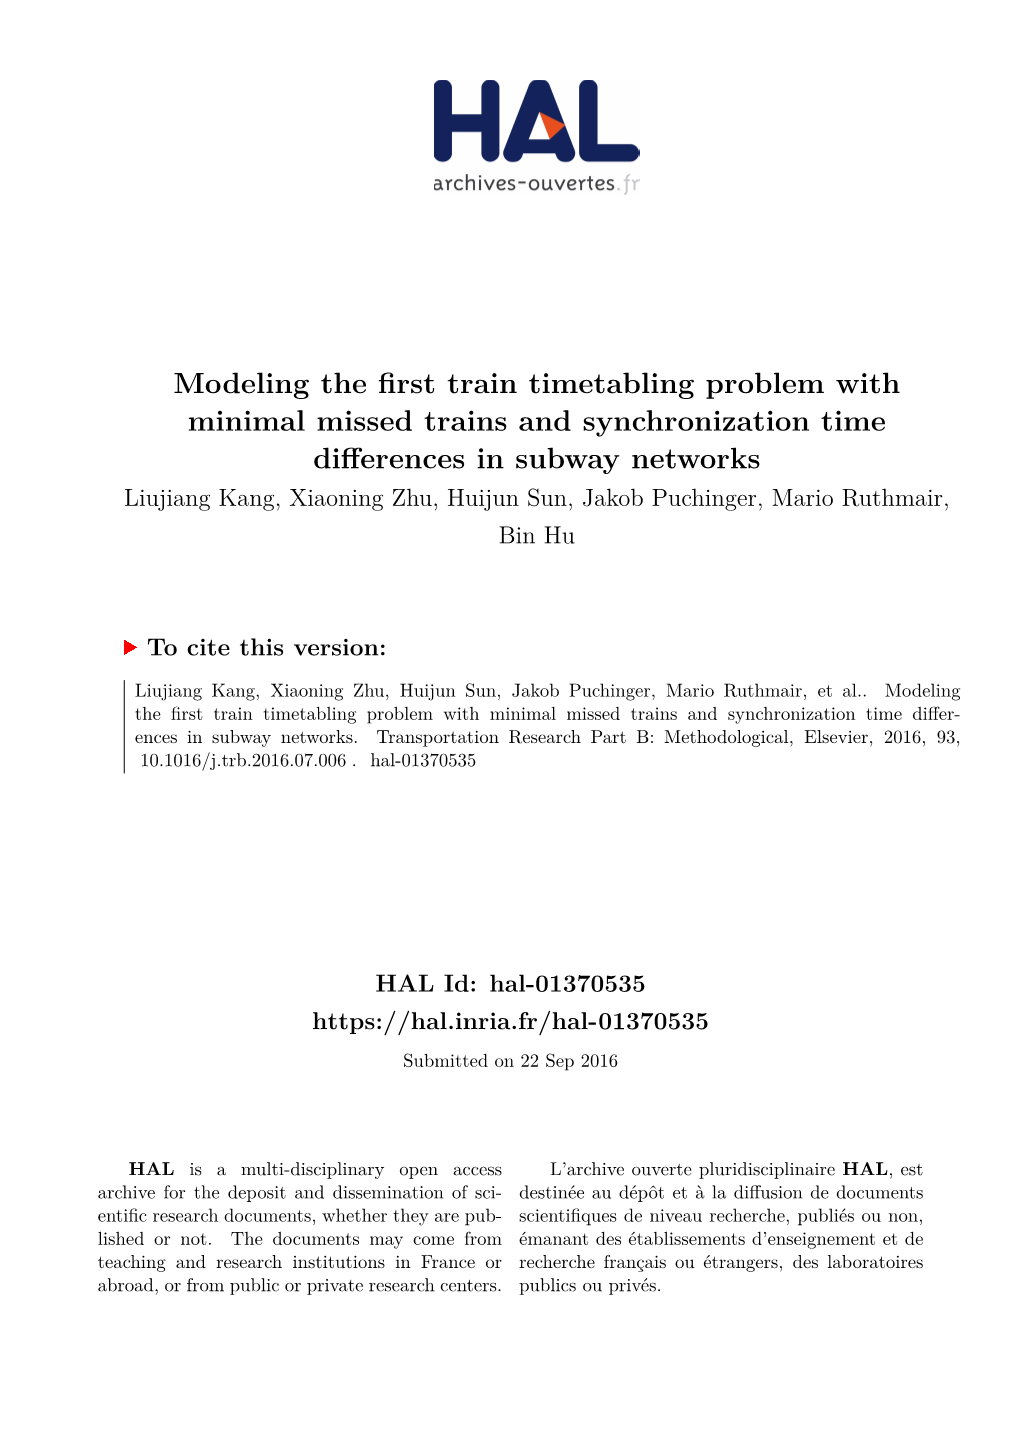 Modeling the First Train Timetabling Problem with Minimal